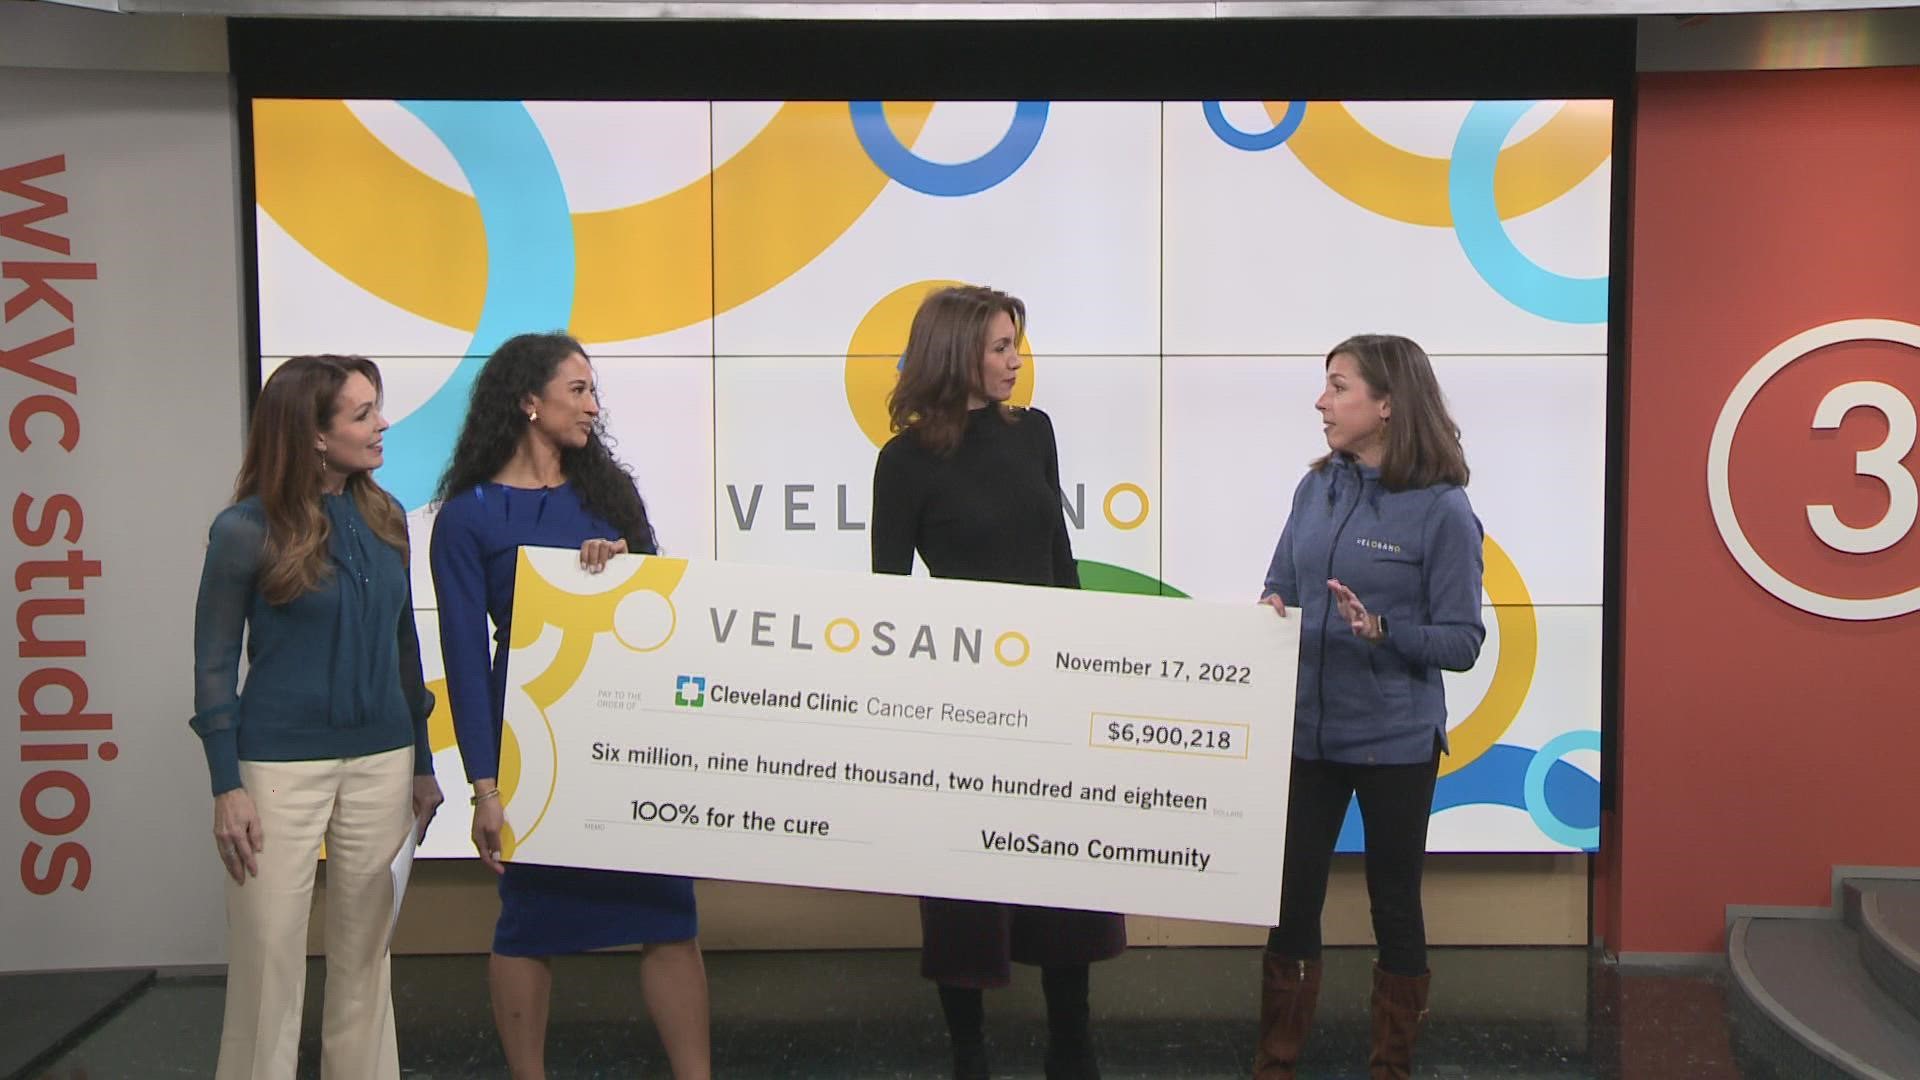 In total, VeloSano has raised more than $37 million for Cleveland Clinic cancer research in the nine years since the initiative began.